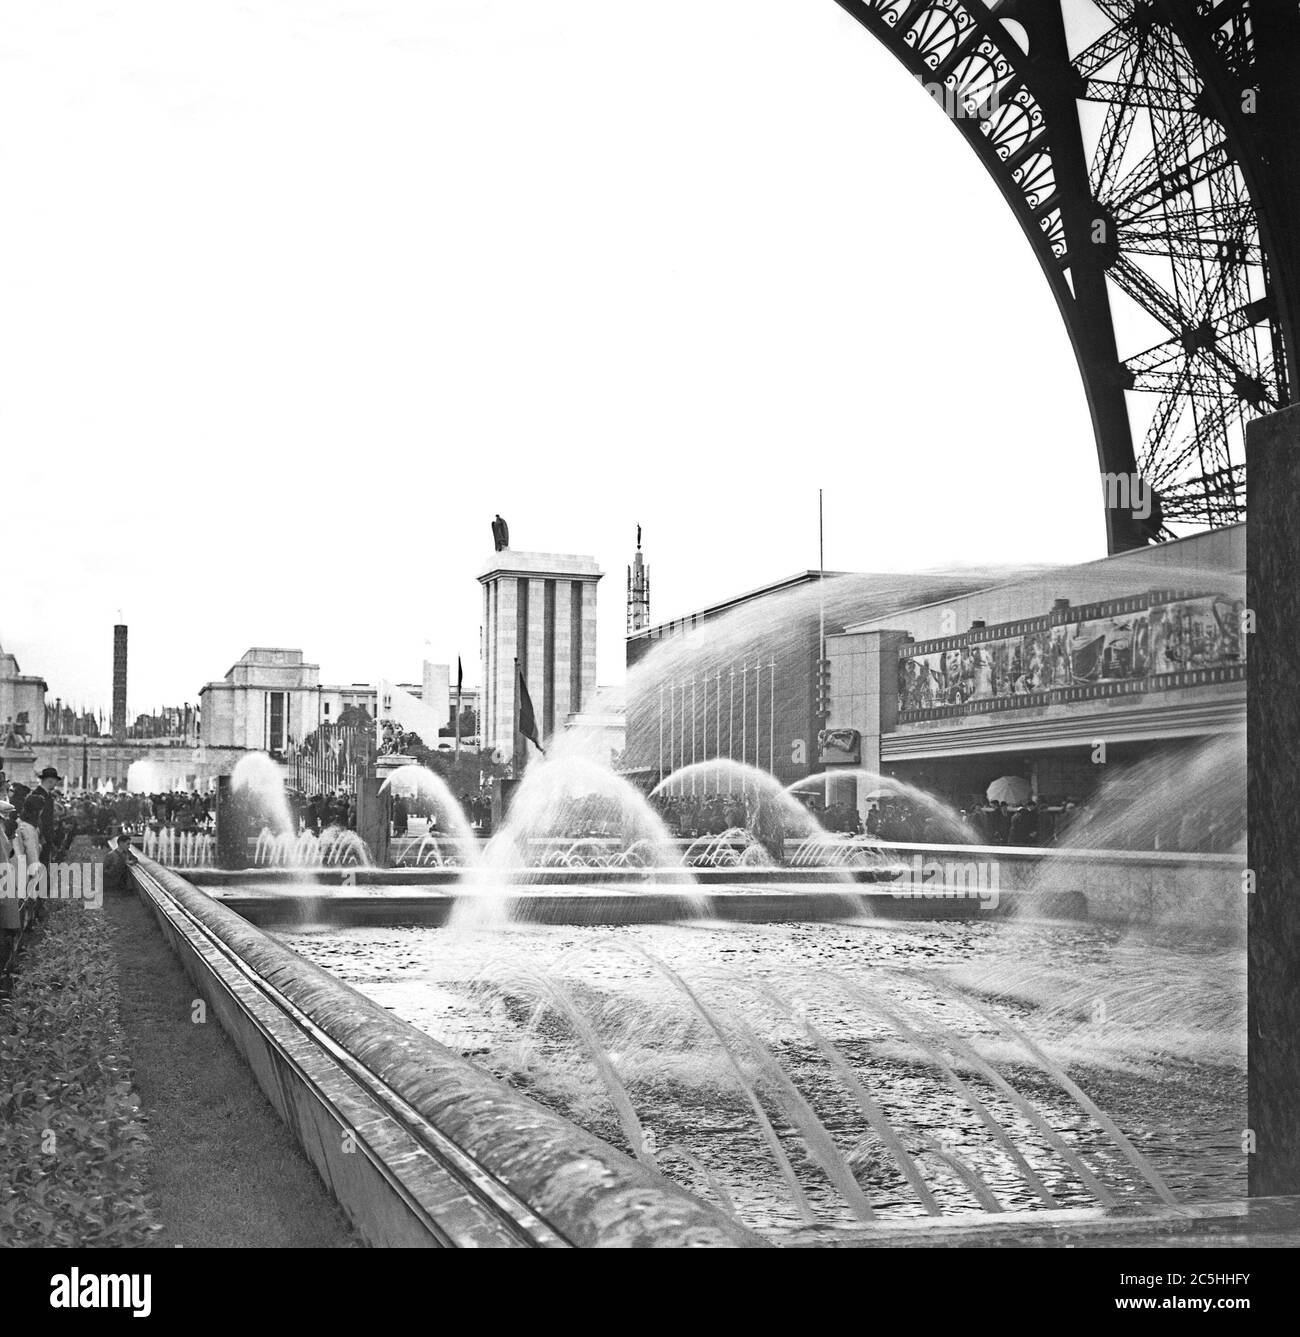 A view of the 1937 Expo (World's Fair or Exposition) held in Paris, France – here looking north from below the Eiffel Tower. Behind the fountains on the right is the Cinema and Photography pavilion, behind which is the modest Belgian pavilion. Beyond, across the River Seine in the 'Sections Etrangeres' of the site is the German pavilion. Hitler's architect Albert Speer designed the German pavilion. Speer's pavilion was fronted by the tall tower crowned with the symbols of the Nazi state, the eagle and the swastika. Stock Photo